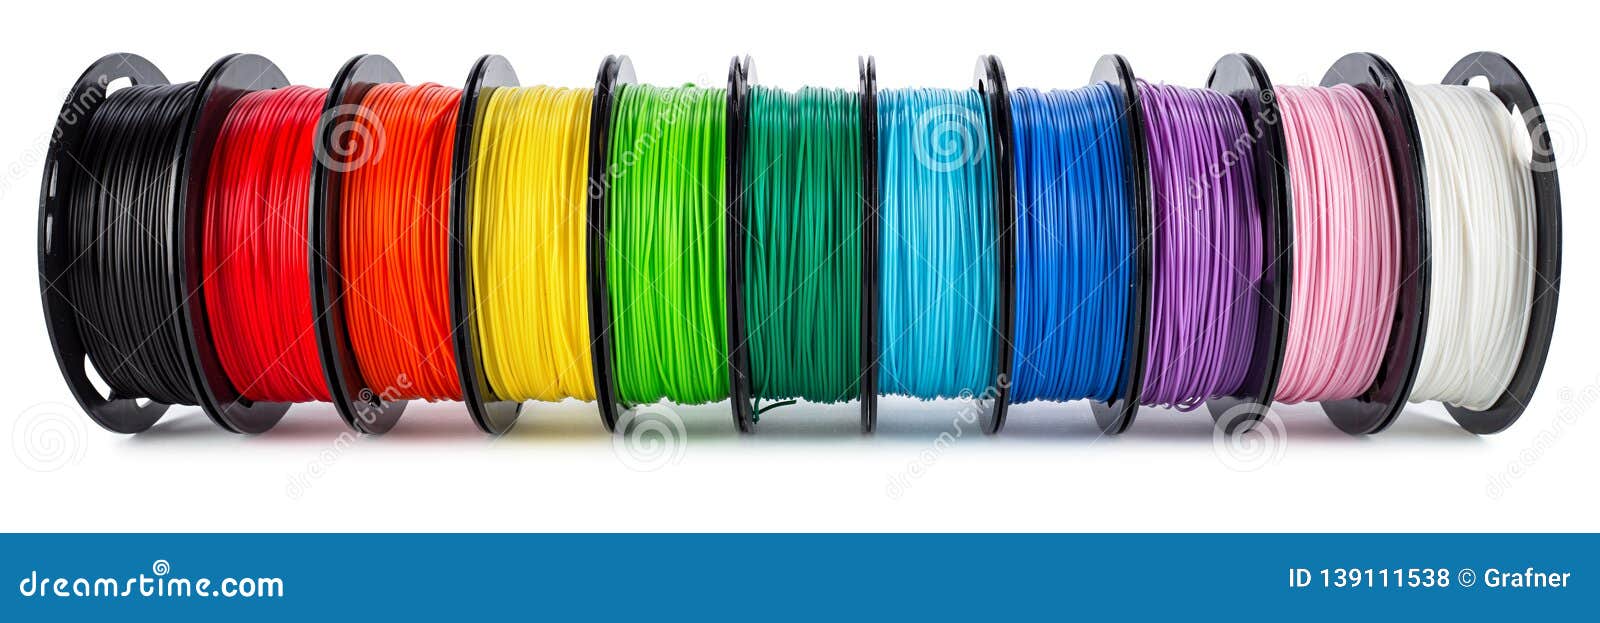 colorful bright wide panorama row of spool 3d printer filament